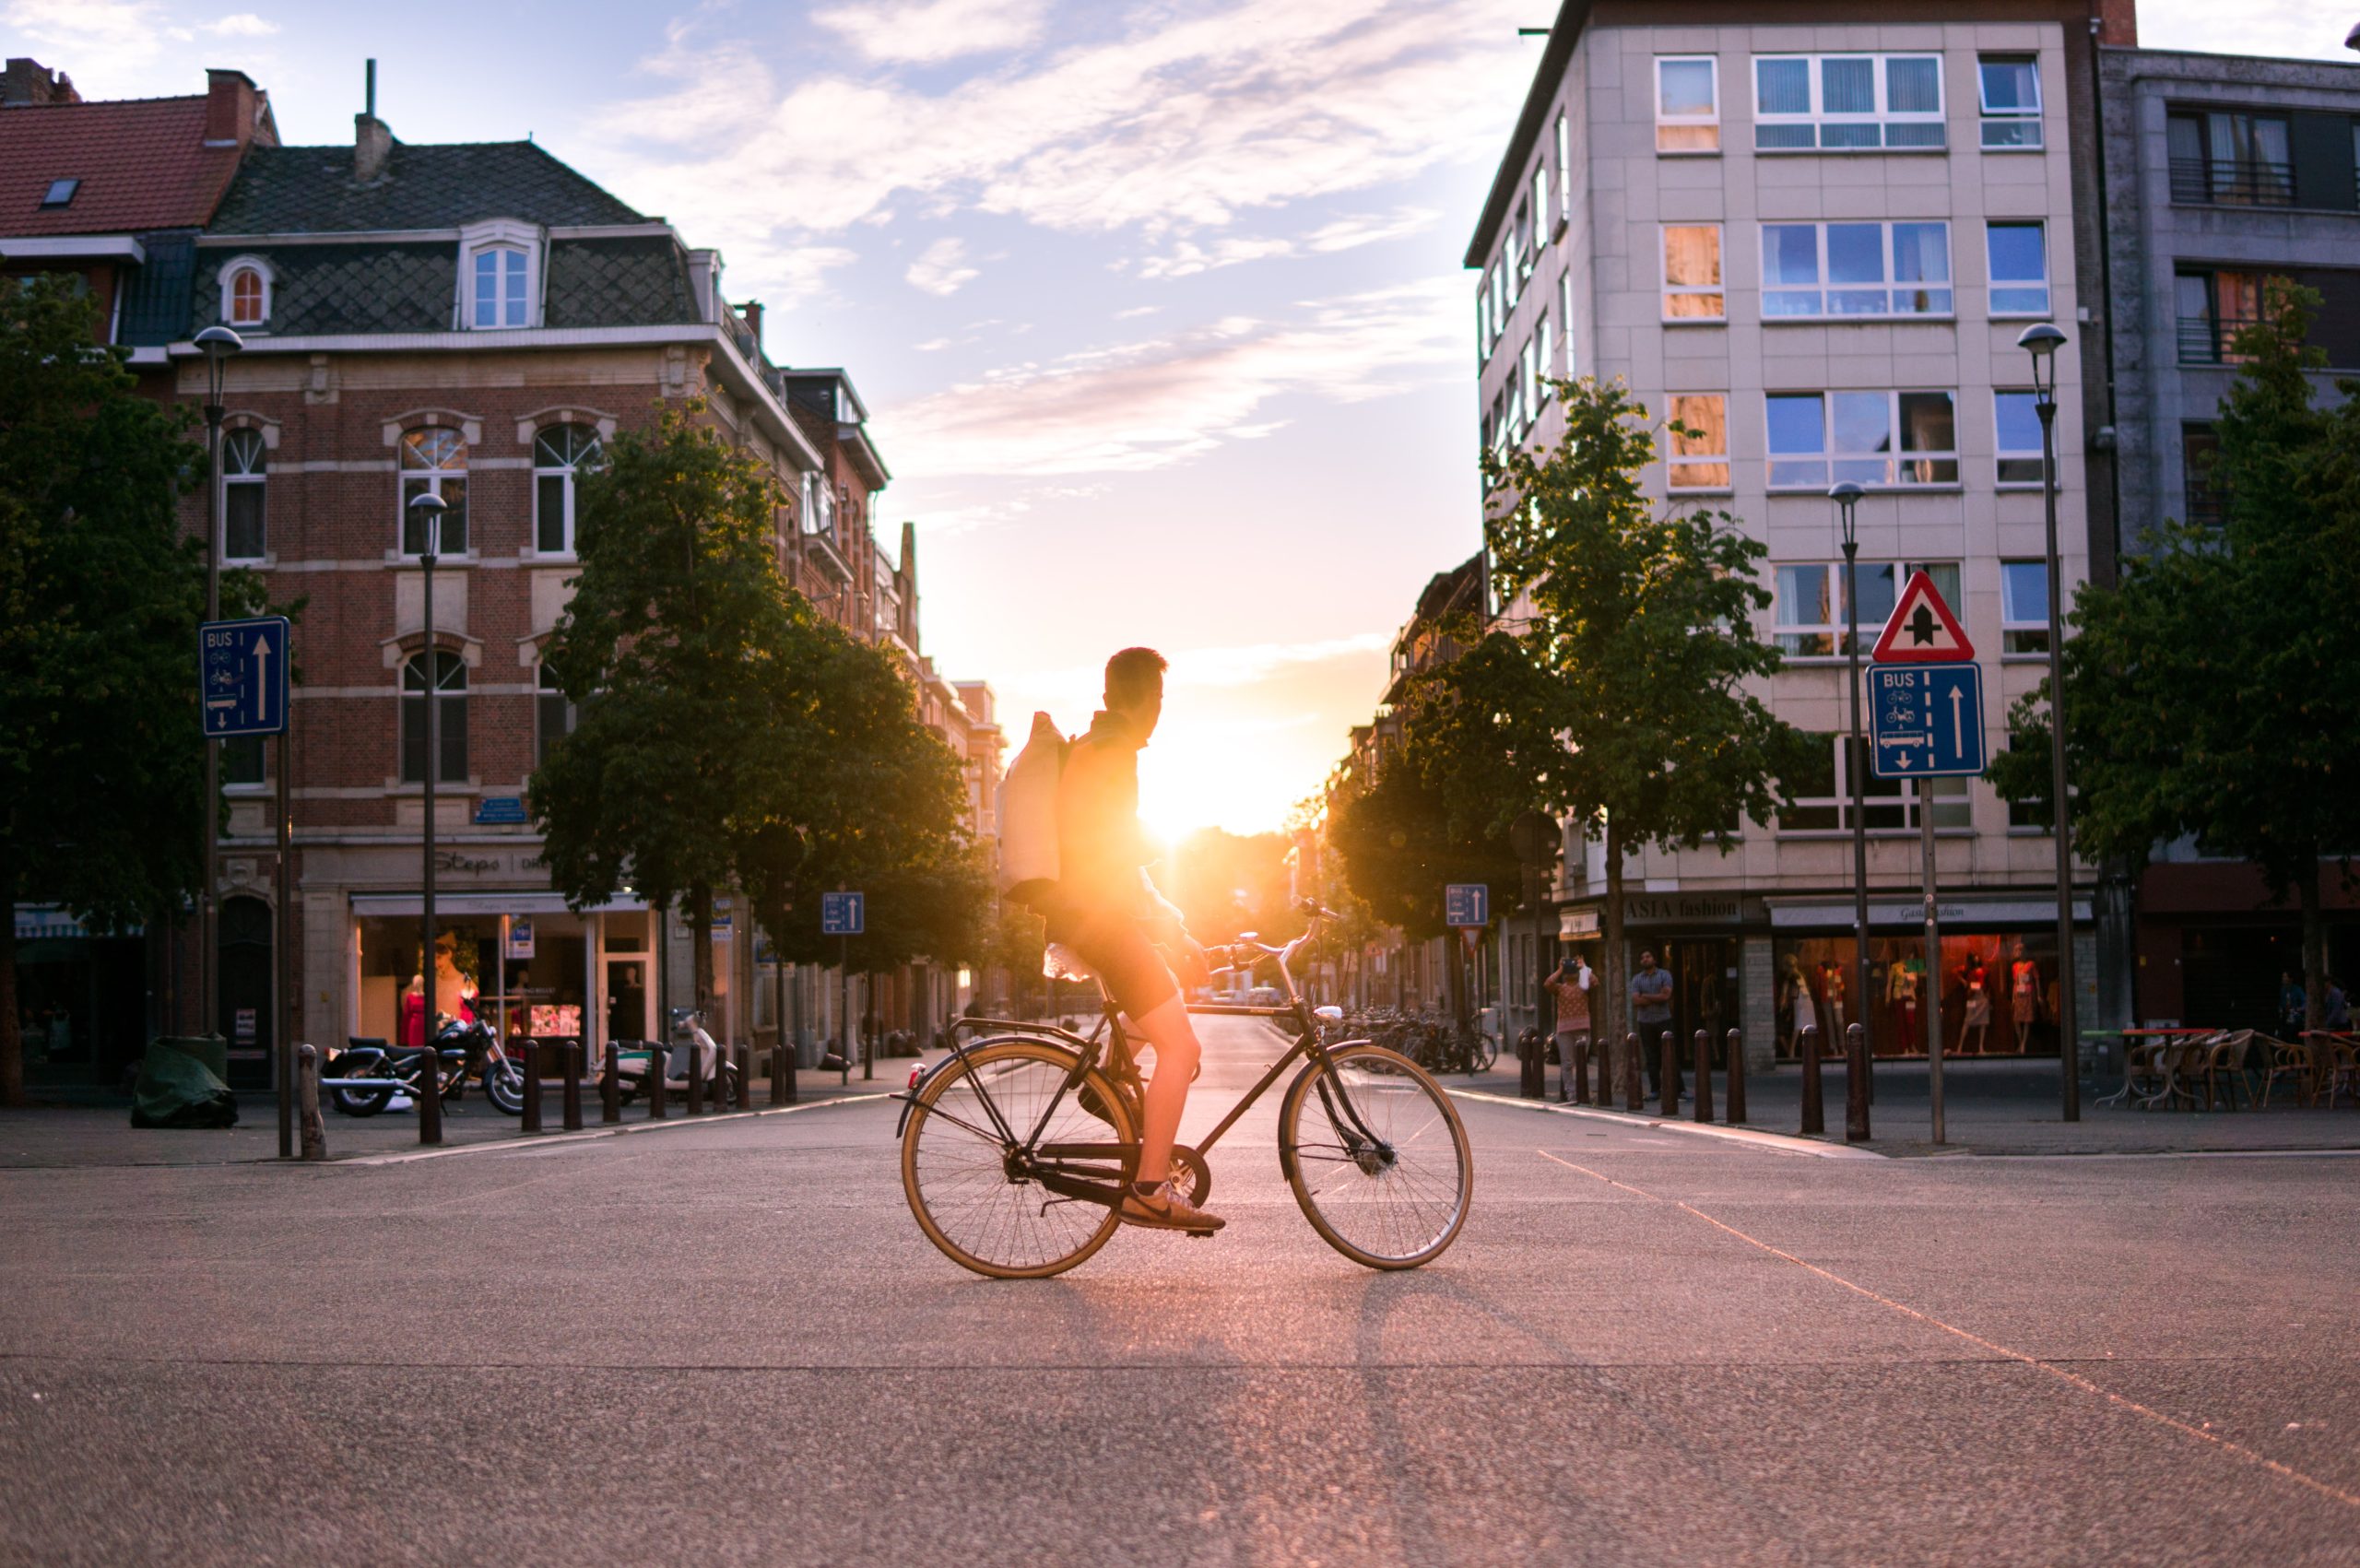 Urban Cycling: What does a bikeable city look like? - Topos Magazine